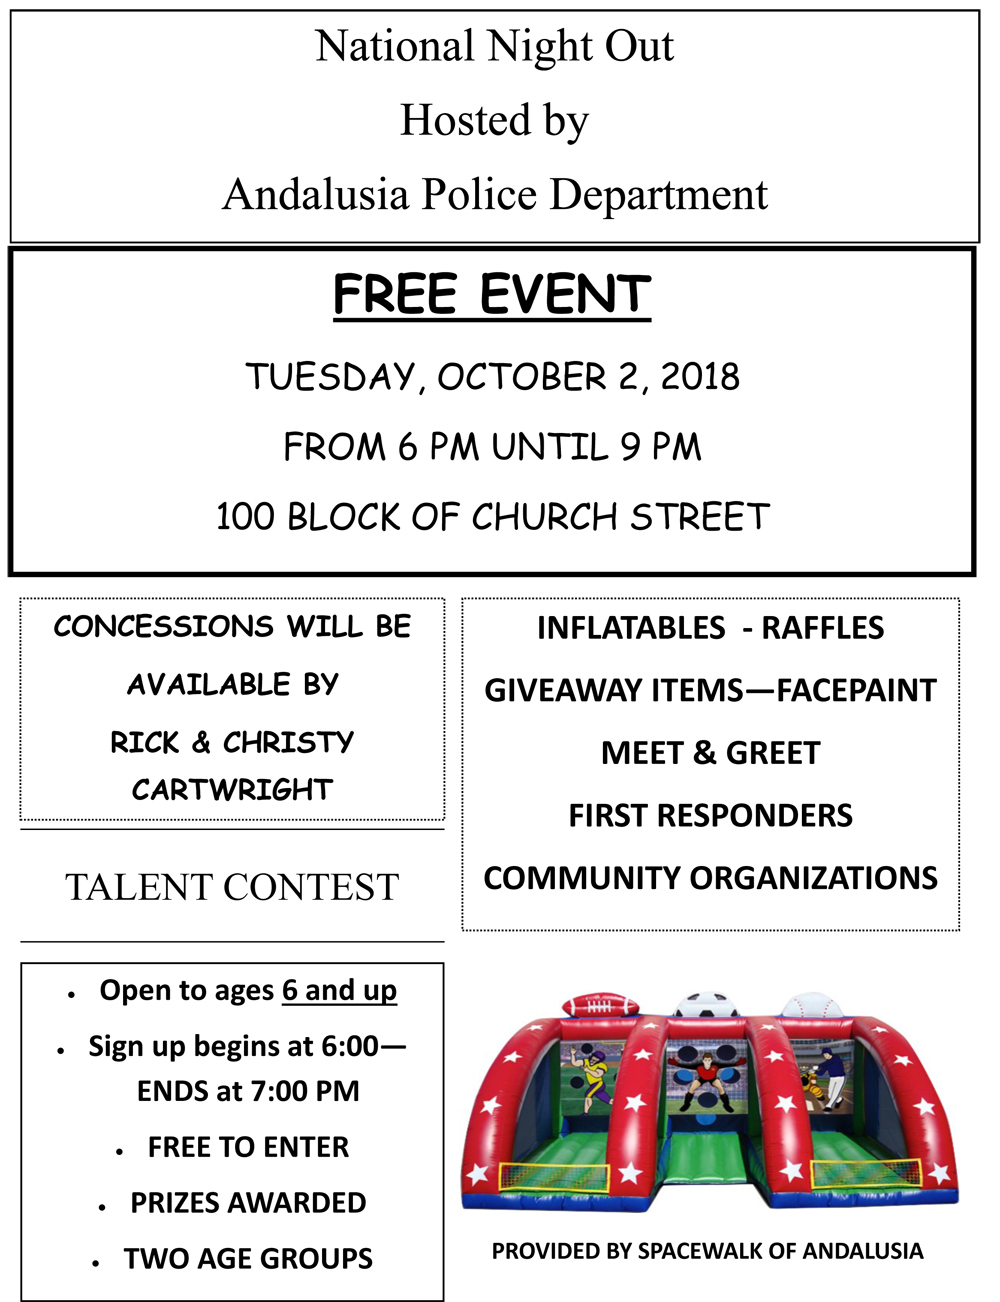 NATIONAL NIGHT OUT FLYER 2018 2